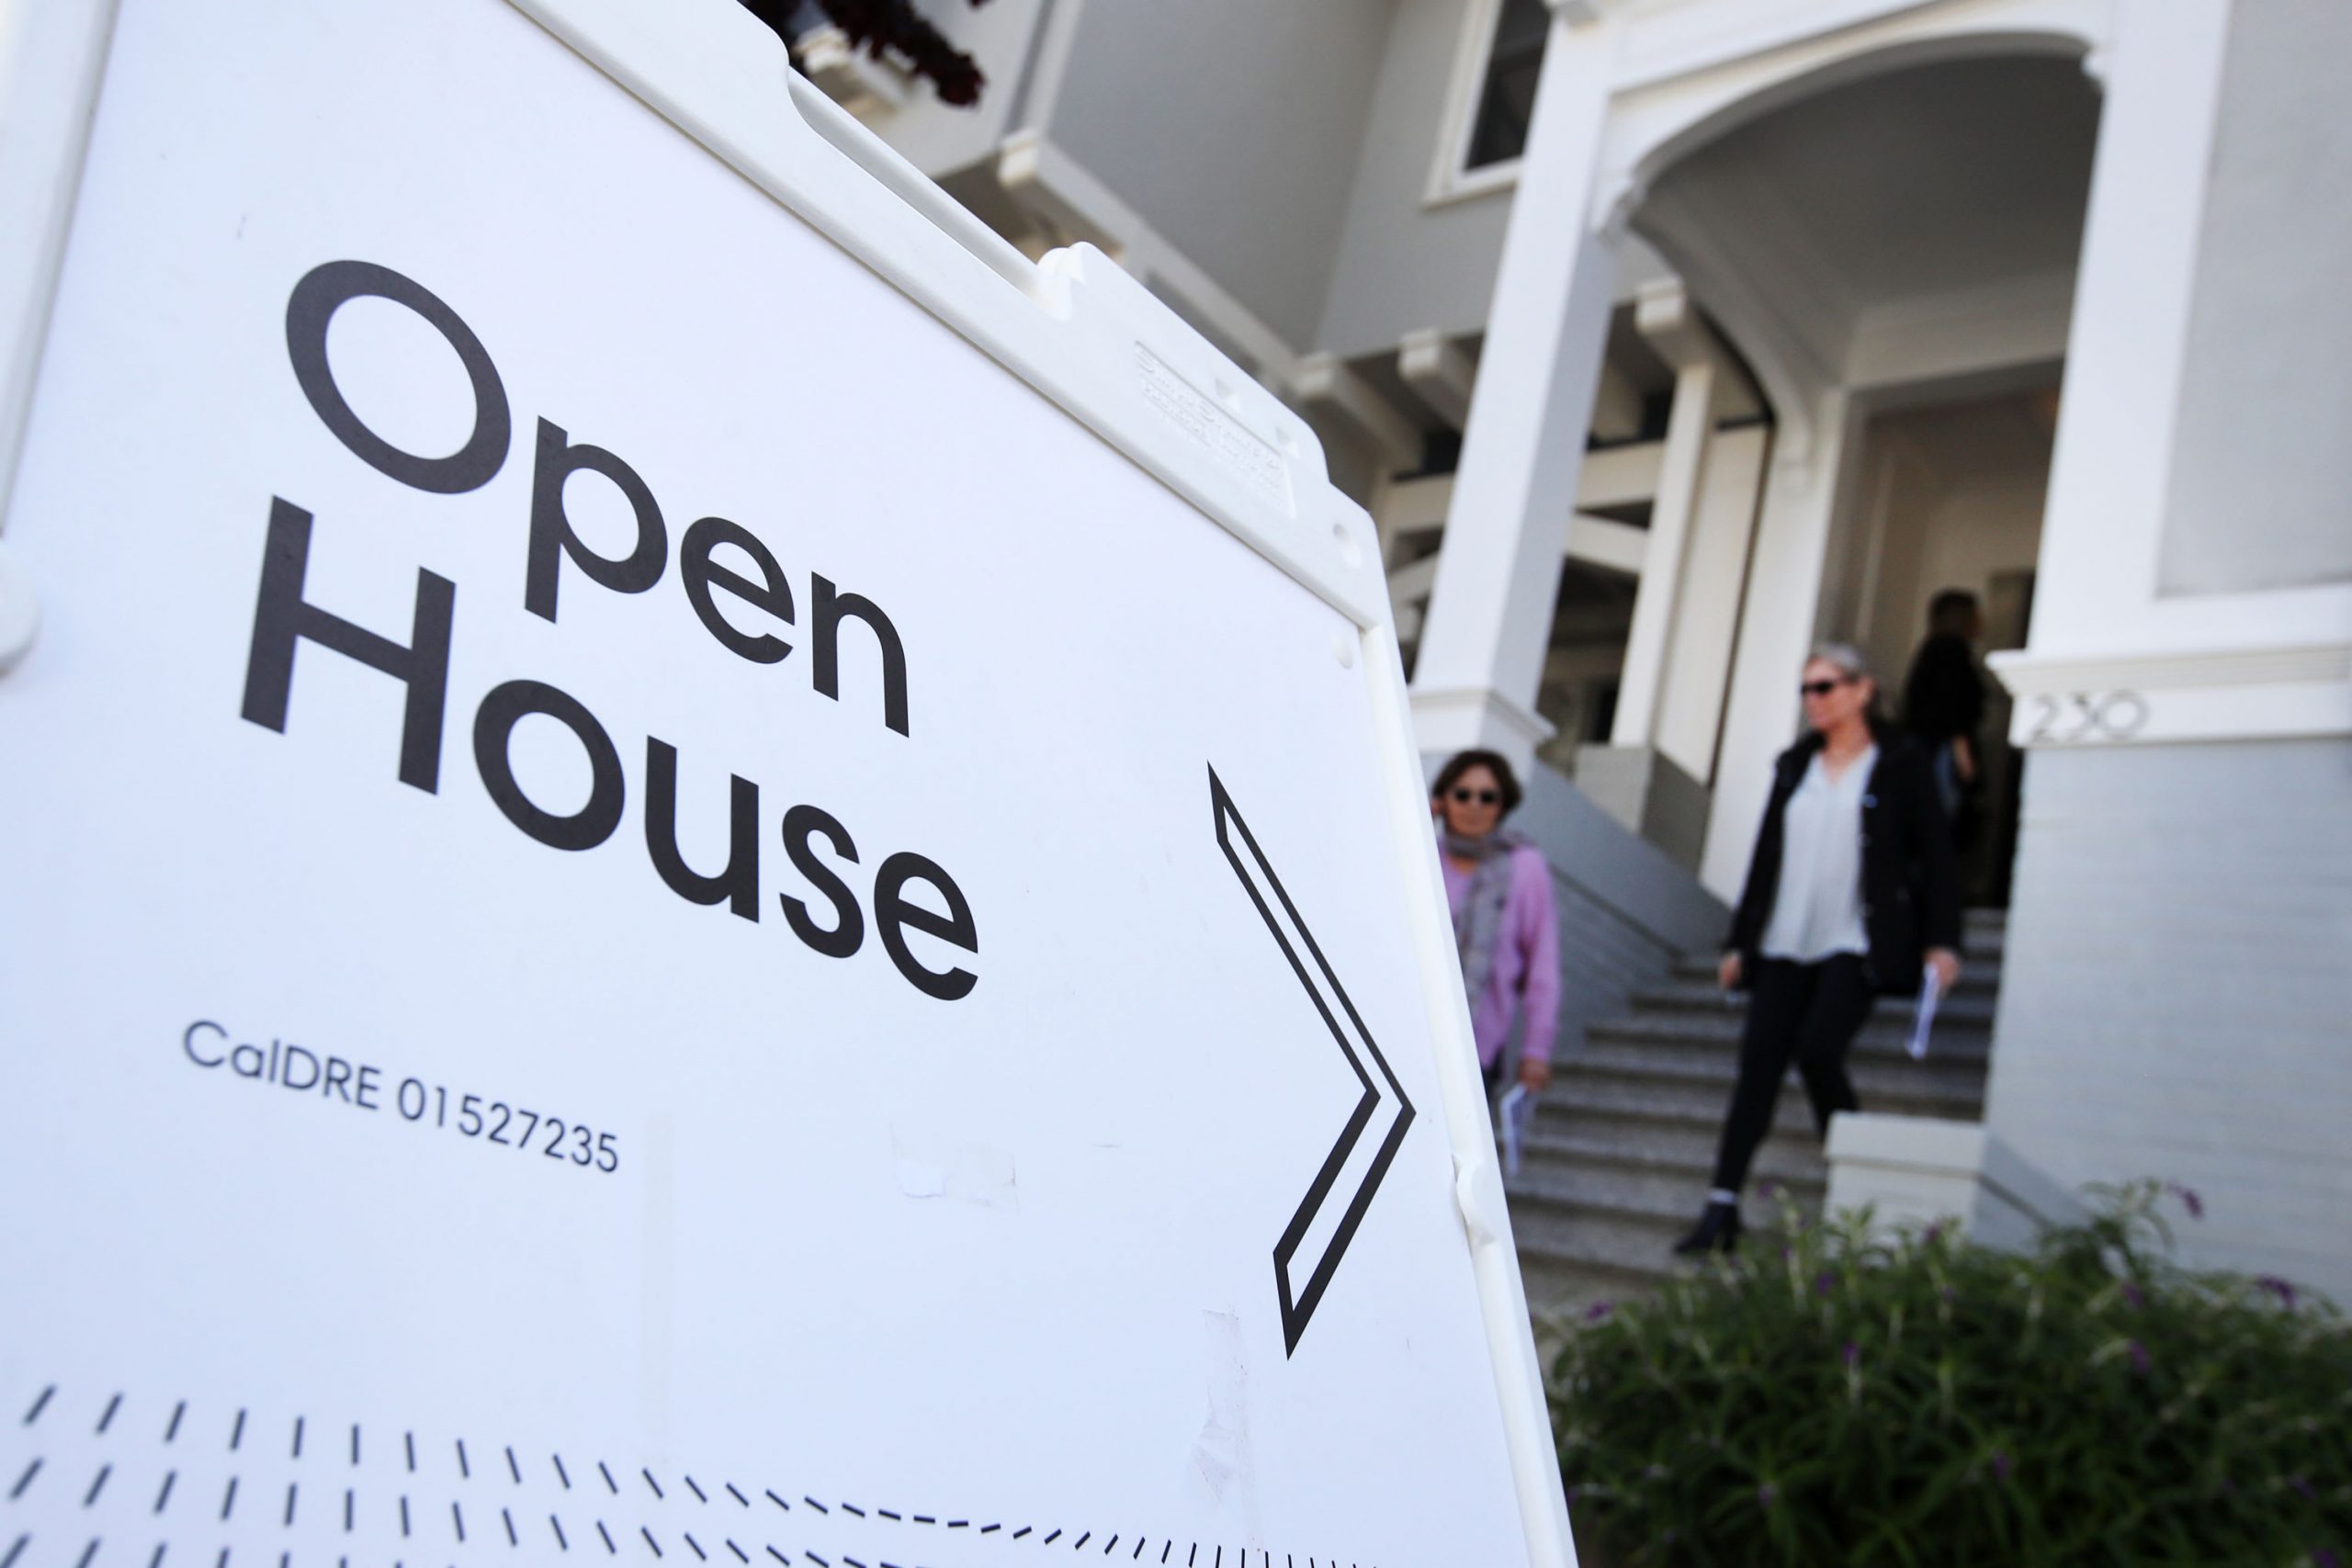 Home prices rose at slower rate in May, according to S&P Case-Shiller